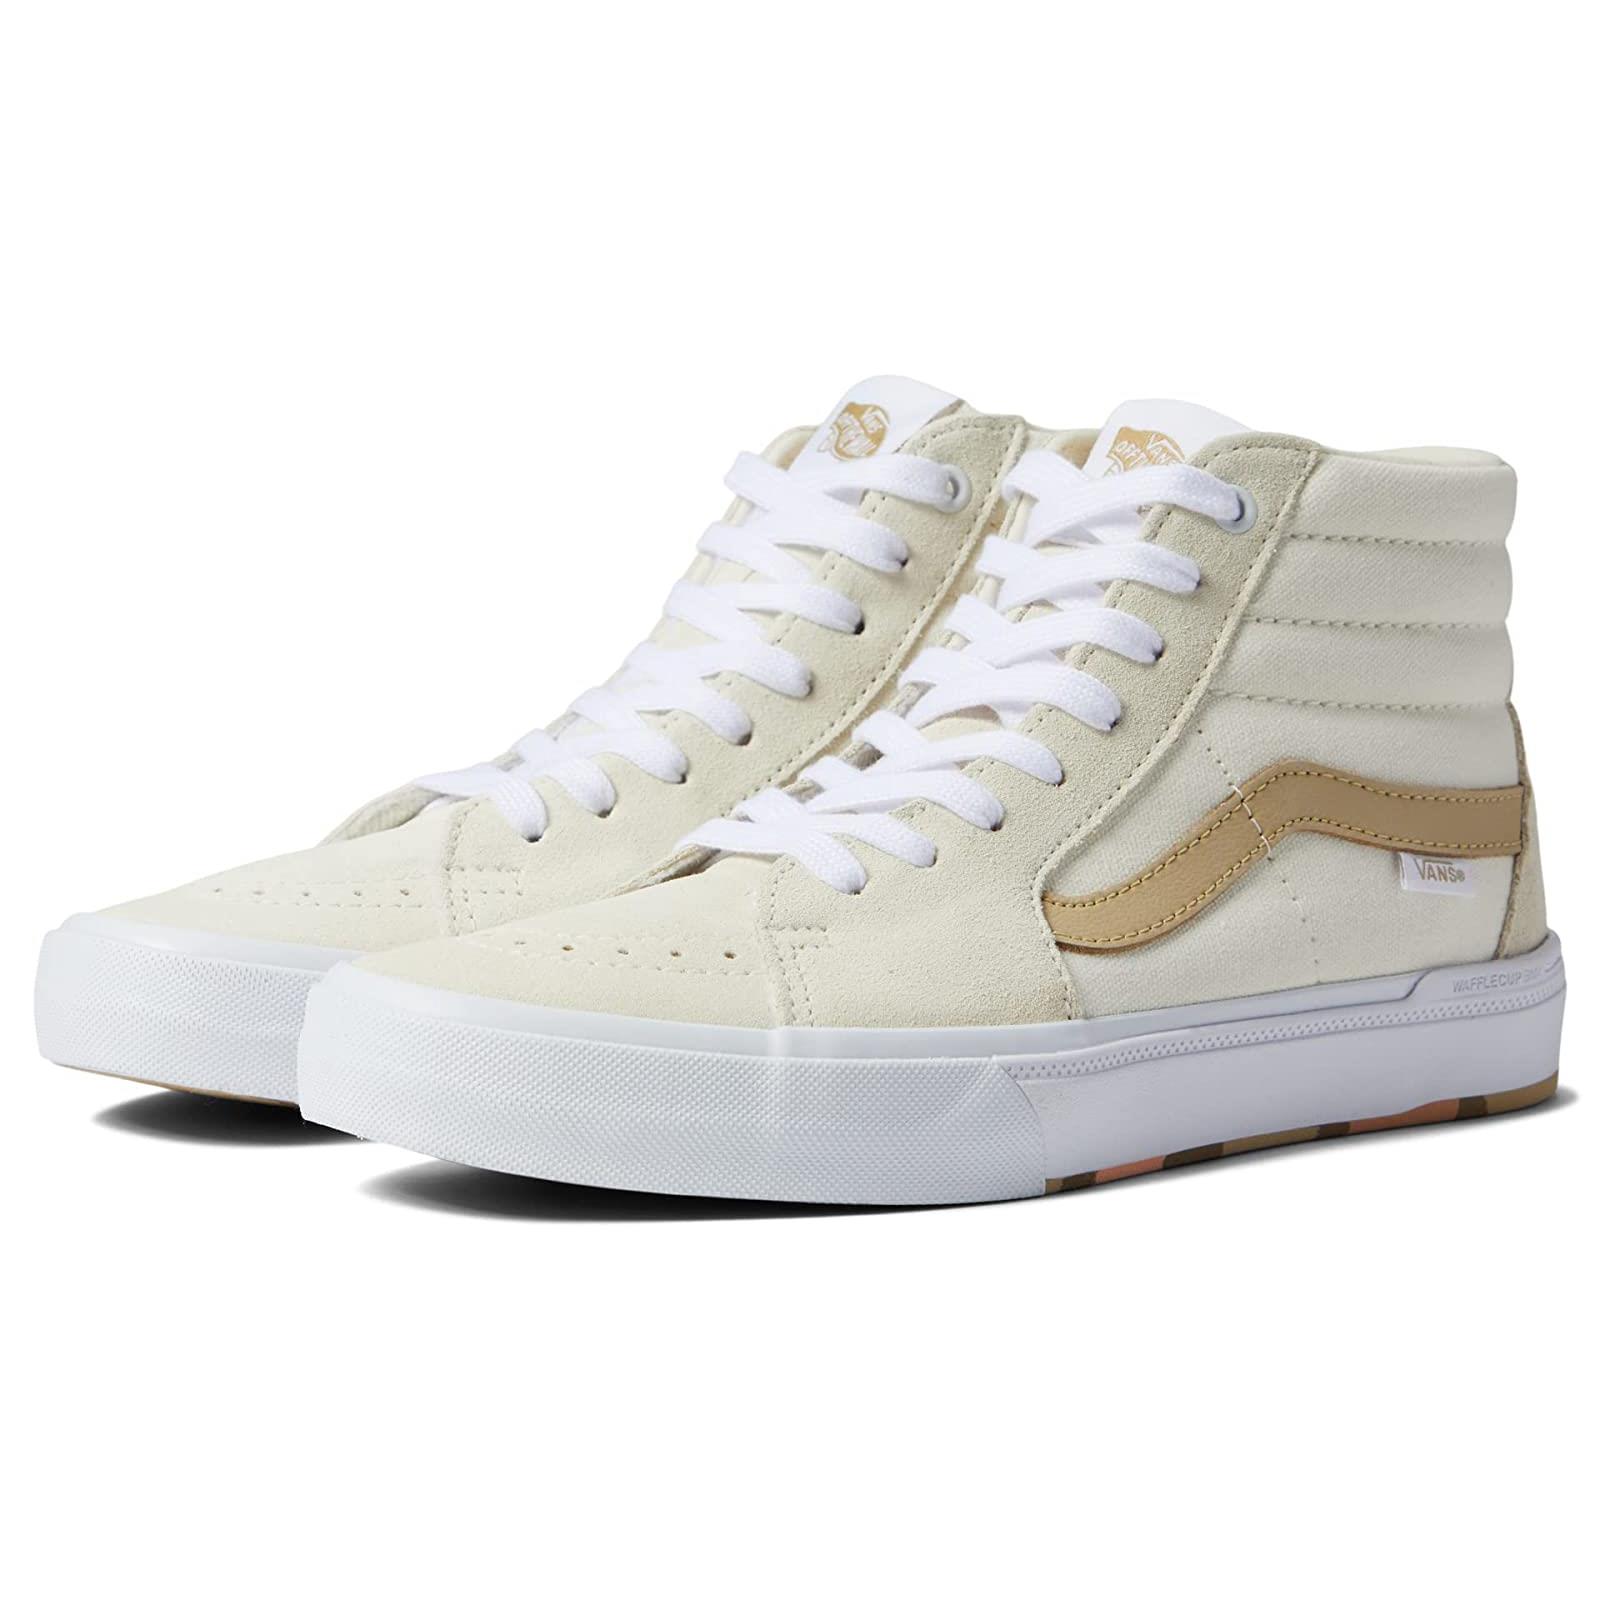 Man`s Sneakers Athletic Shoes Vans Bmx Sk8-Hi (Angie Marino) Antique/Taupe